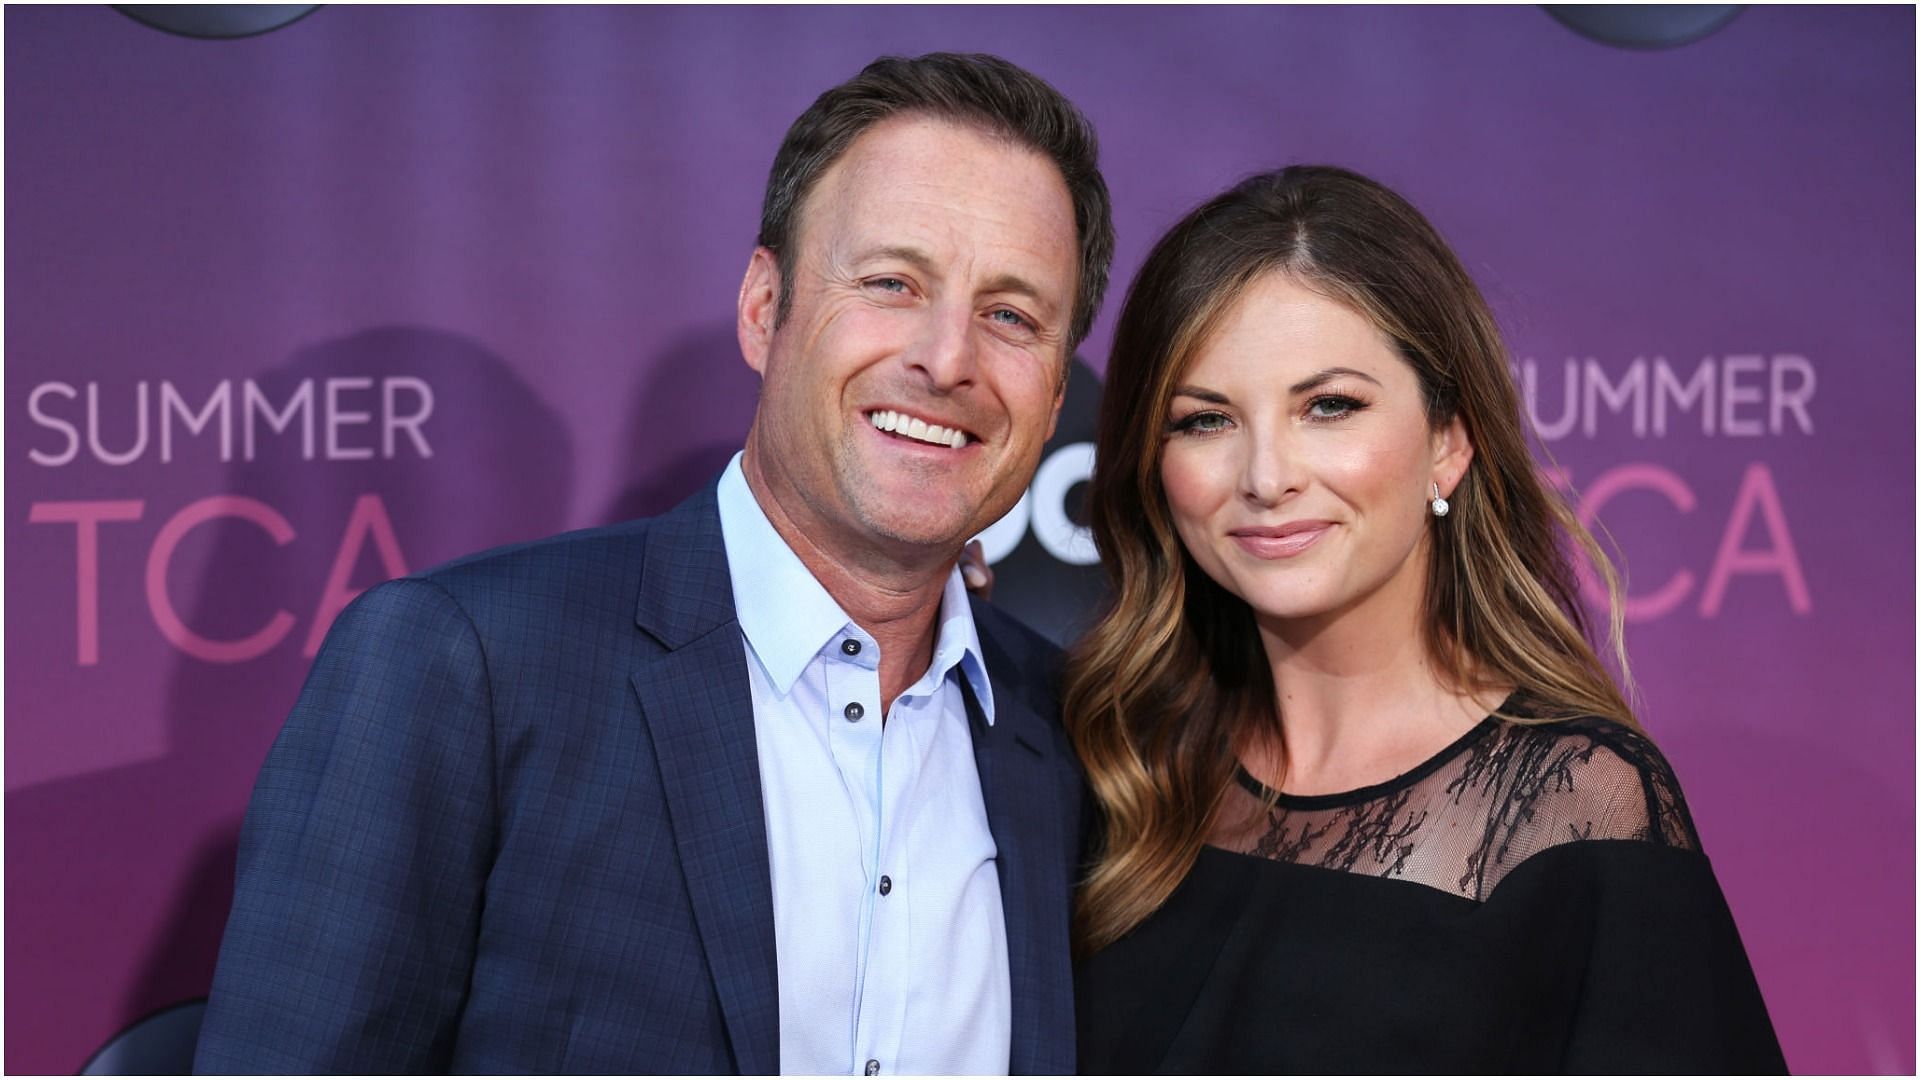 Chris Harrison and Lauren Zima attend ABC&#039;s TCA Summer Press Tour Carpet Event on August 05, 2019, in West Hollywood, California. (Image via Getty Images)